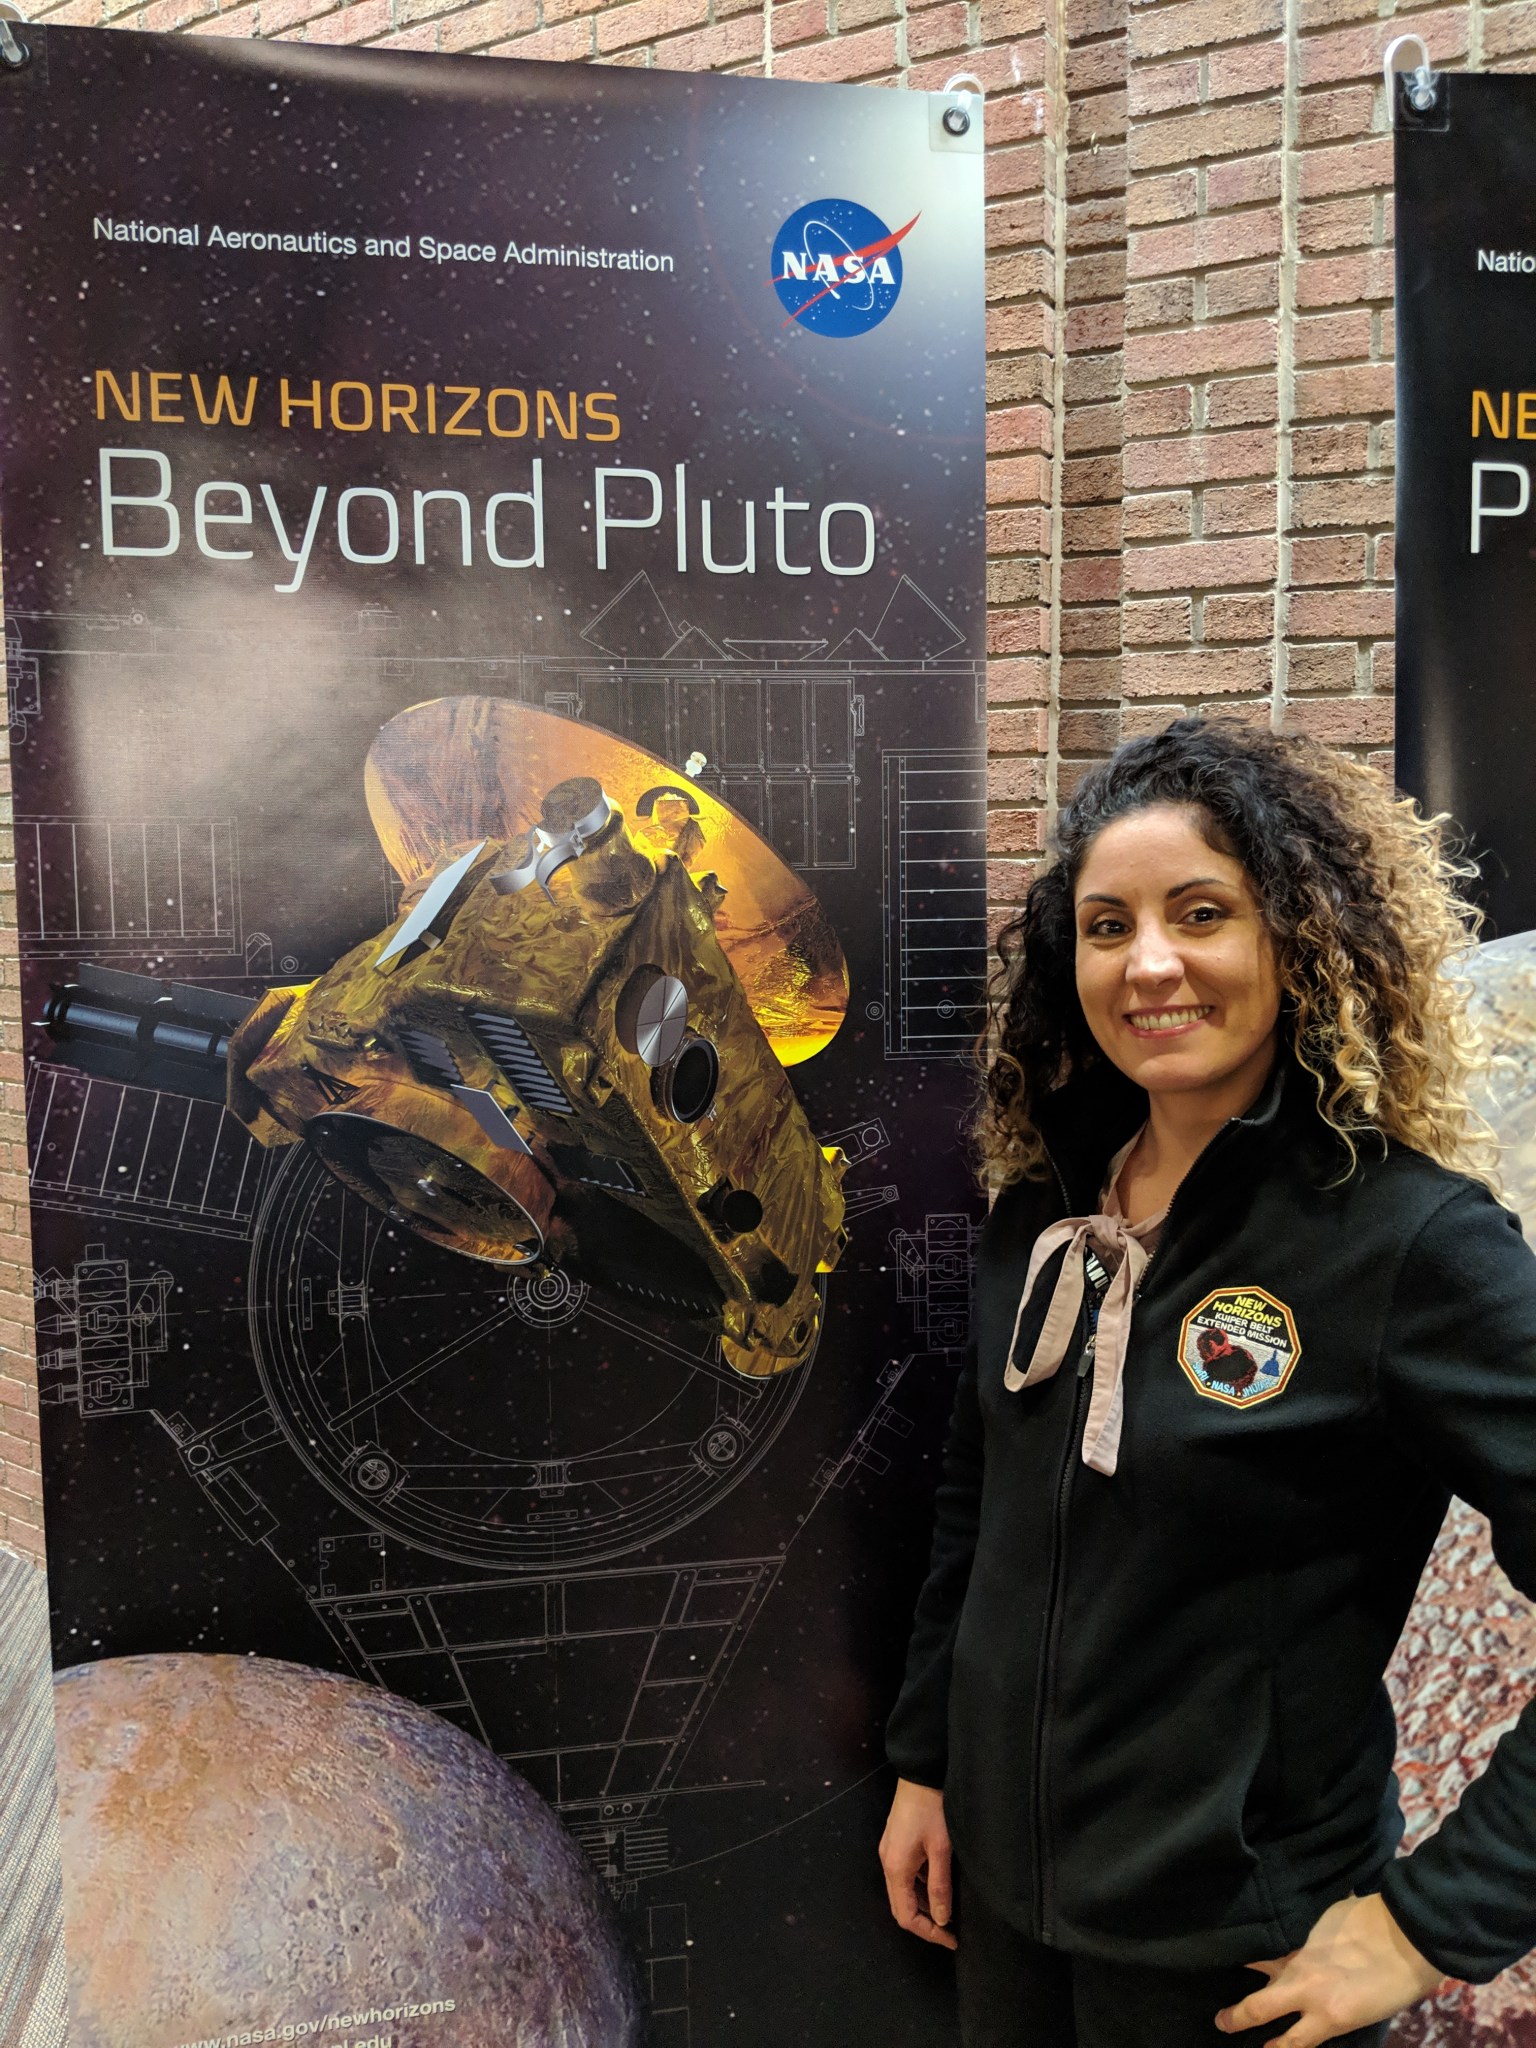 Francesca at the New Horizons encounter with MU66, on January 1st, 2019